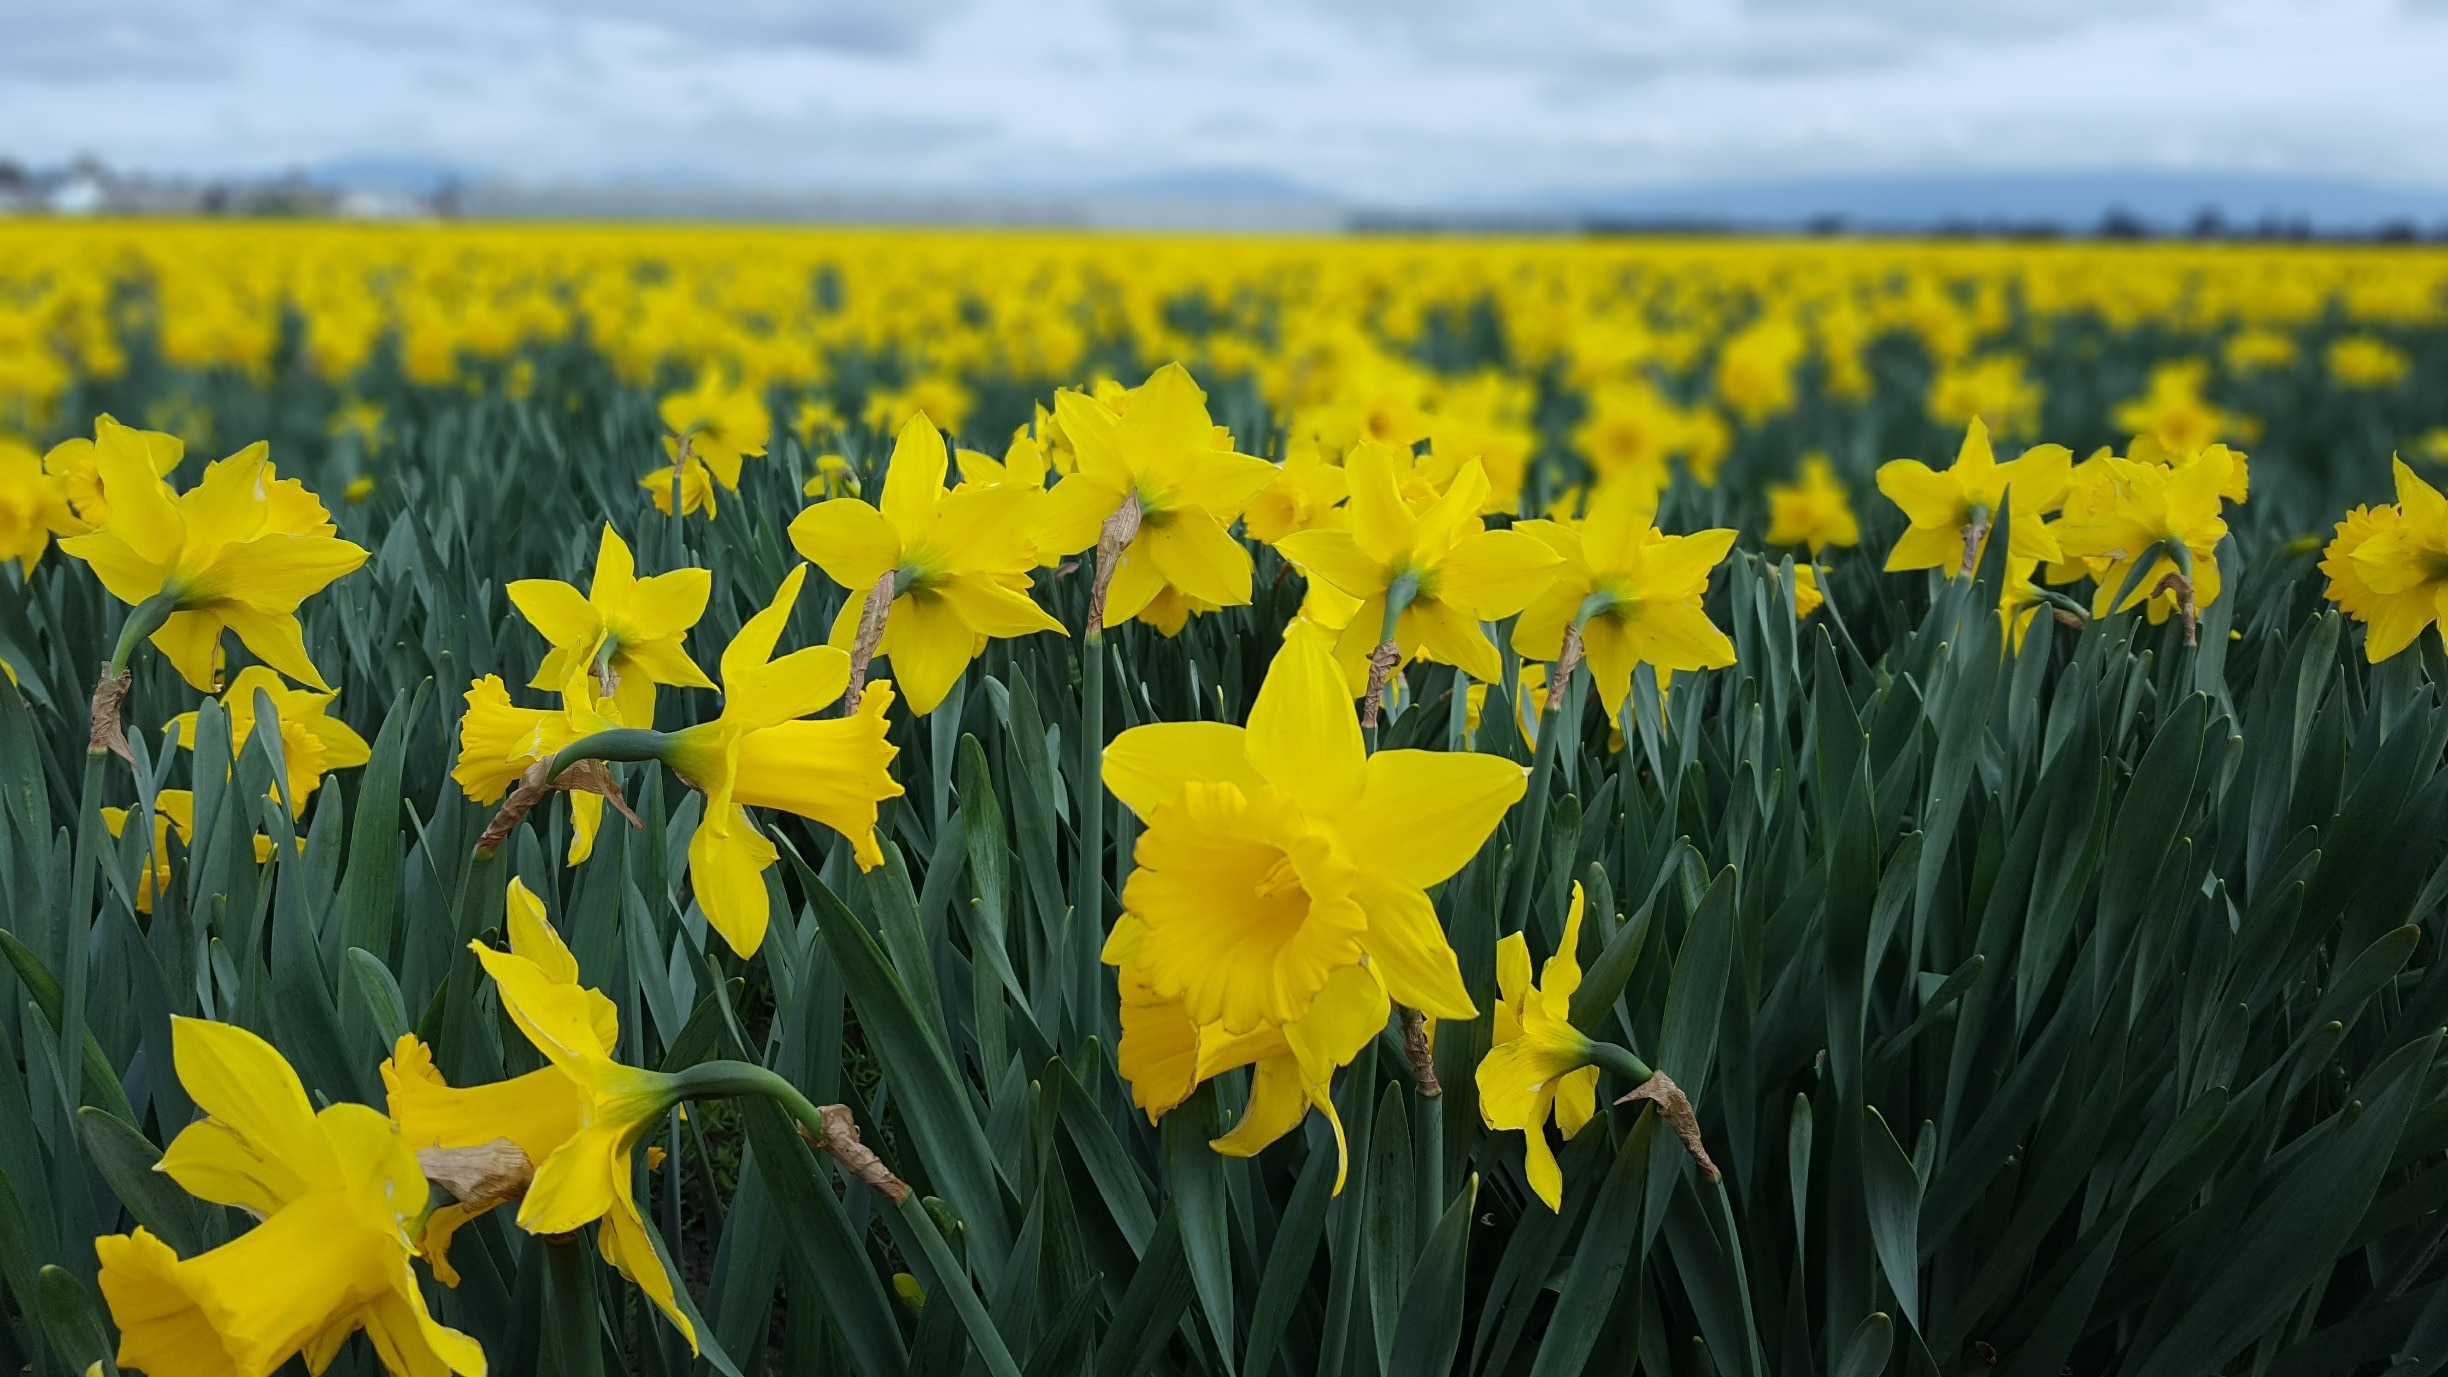 You know it's officially Spring when the sprawling daffodil and tulip fields in Mount Vernon, WA are blooming. Go early to avoid crowds, and if it's a nice day, rent a bike rather than drive between sites!

#Green #LifeatExpedia